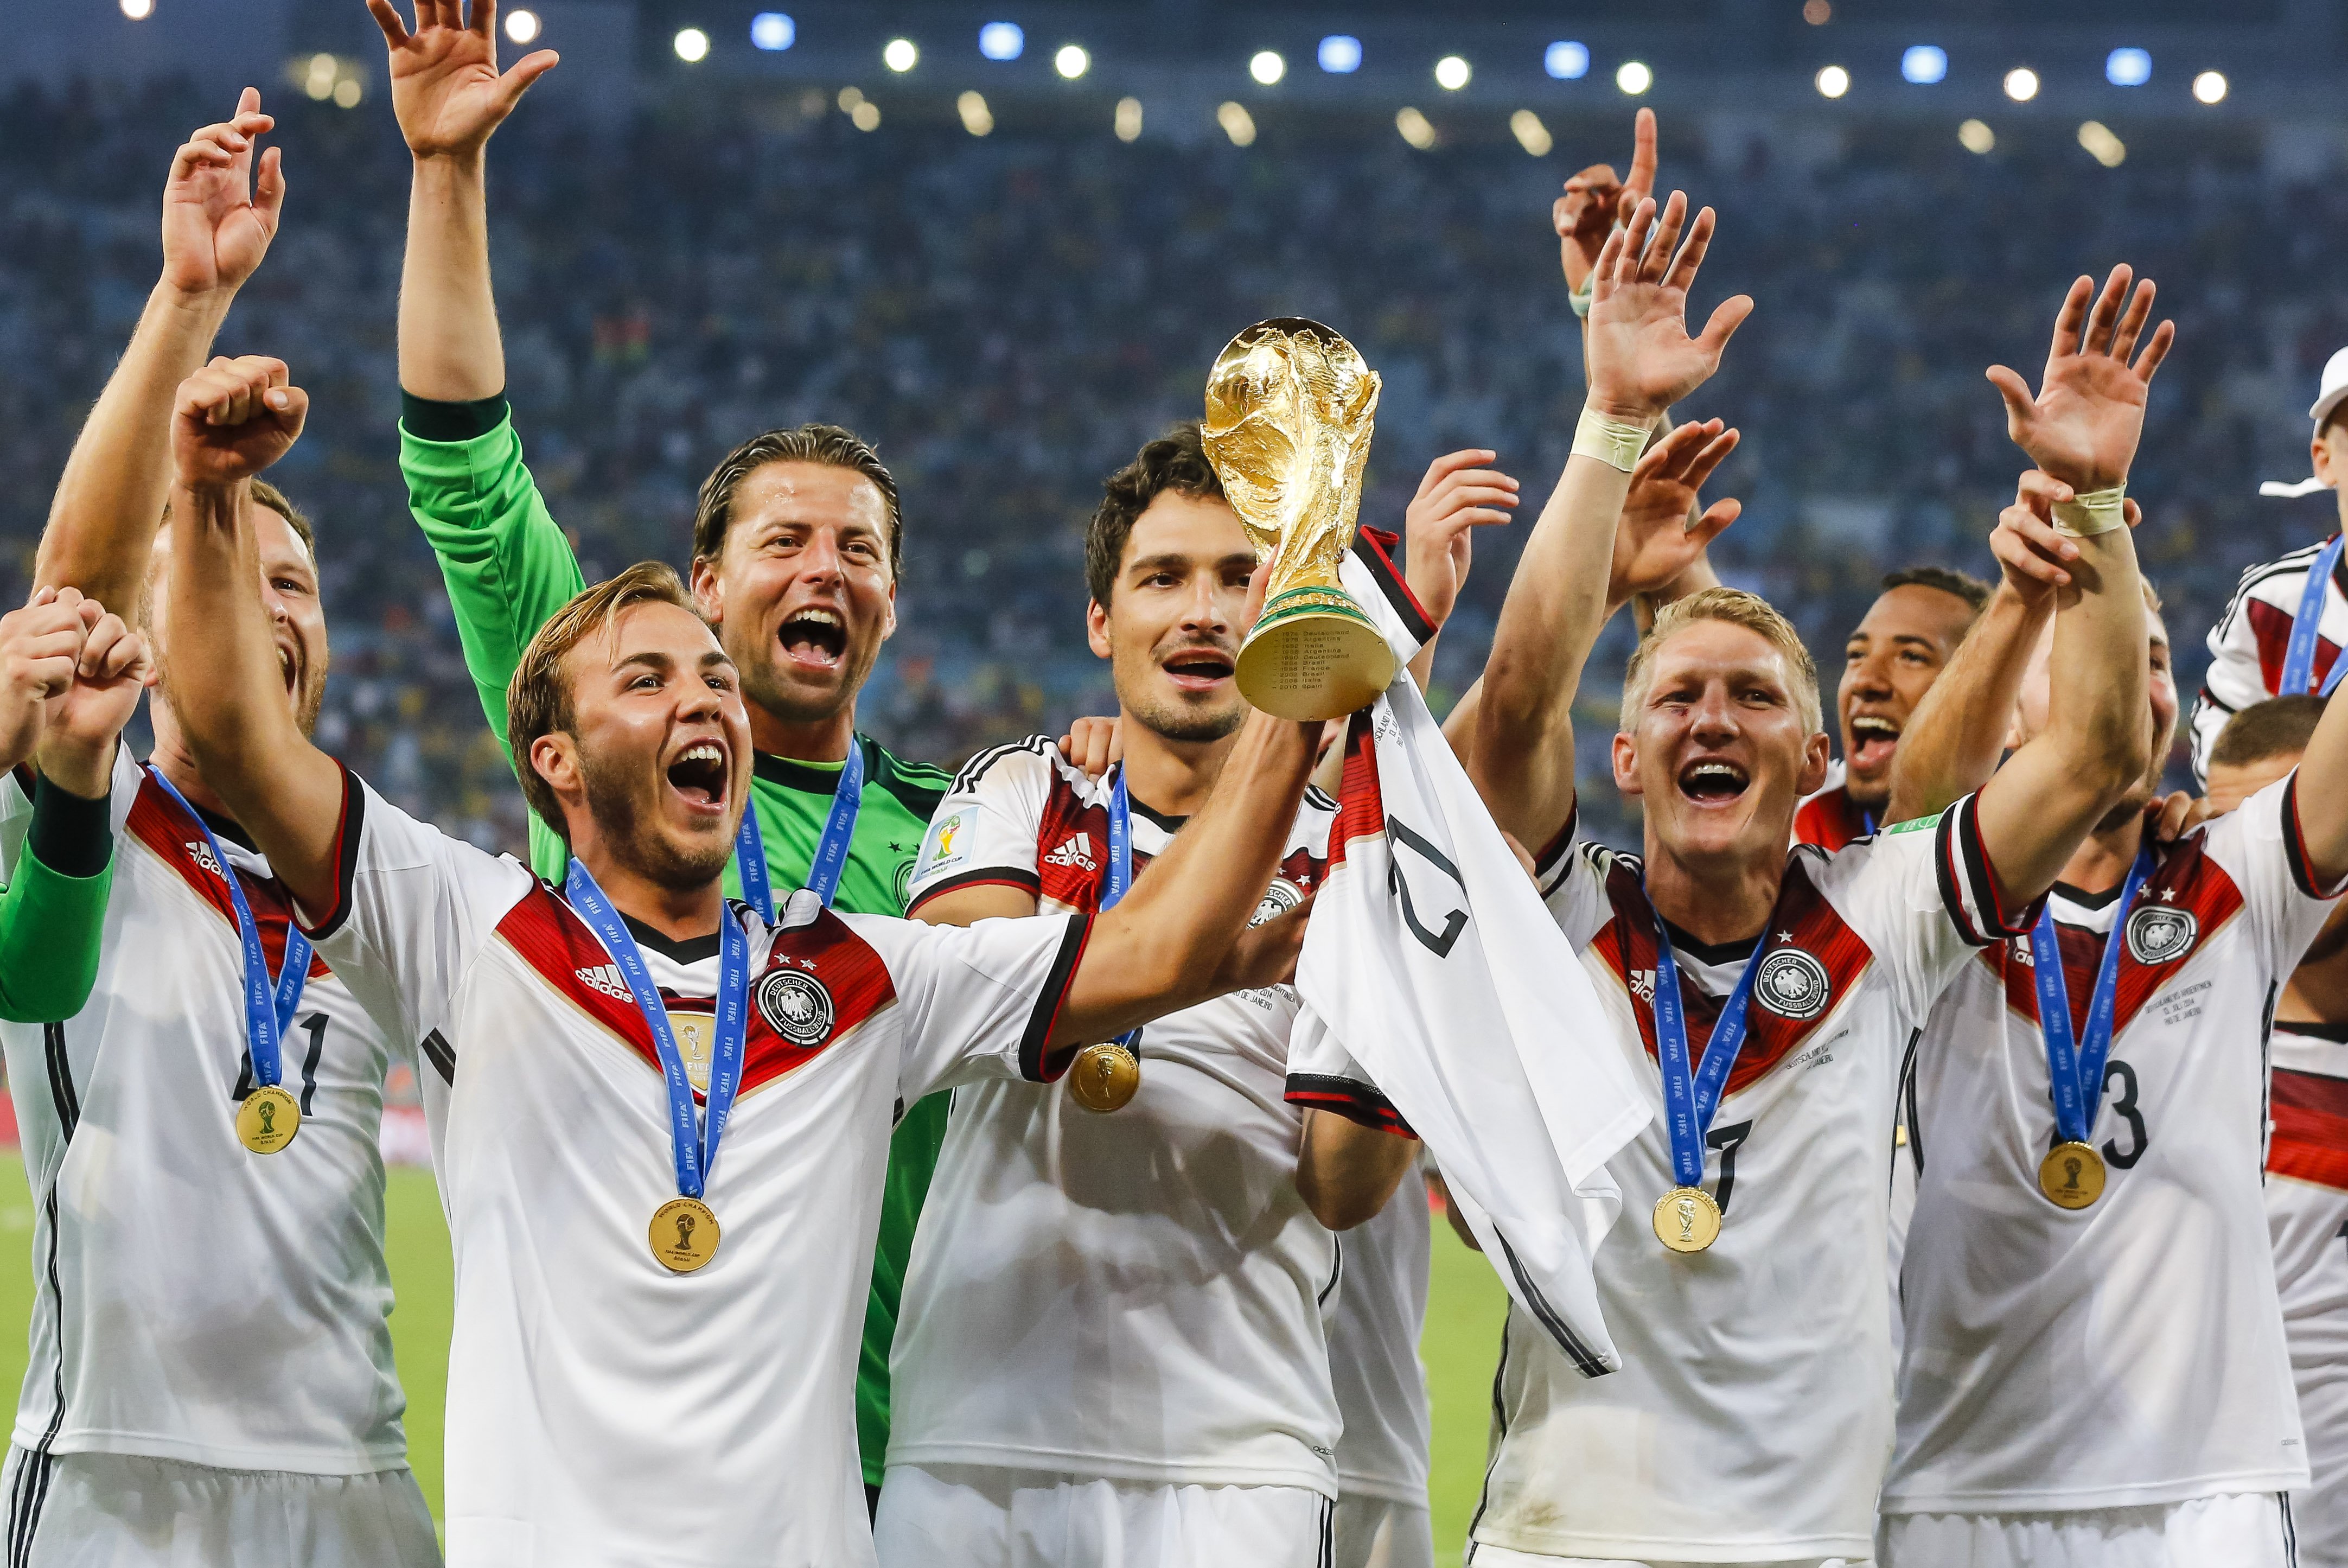 Mario Goetze of Germany holds the World Cup trophy after winning the FIFA World Cup 2014 final soccer match between Germany and Argentina at the Estadio do Maracana in Rio de Janeiro on July 13, 2014. (Action Press/Zuma Press)